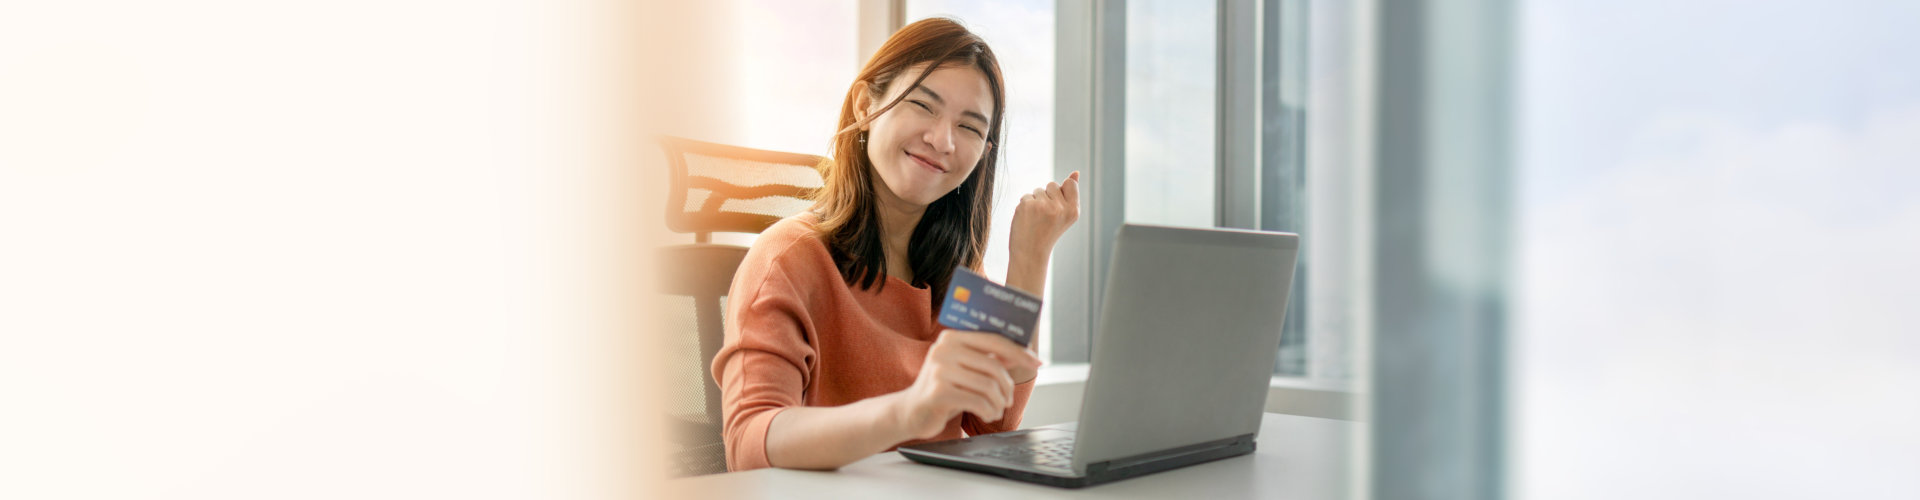 women holding her credit card